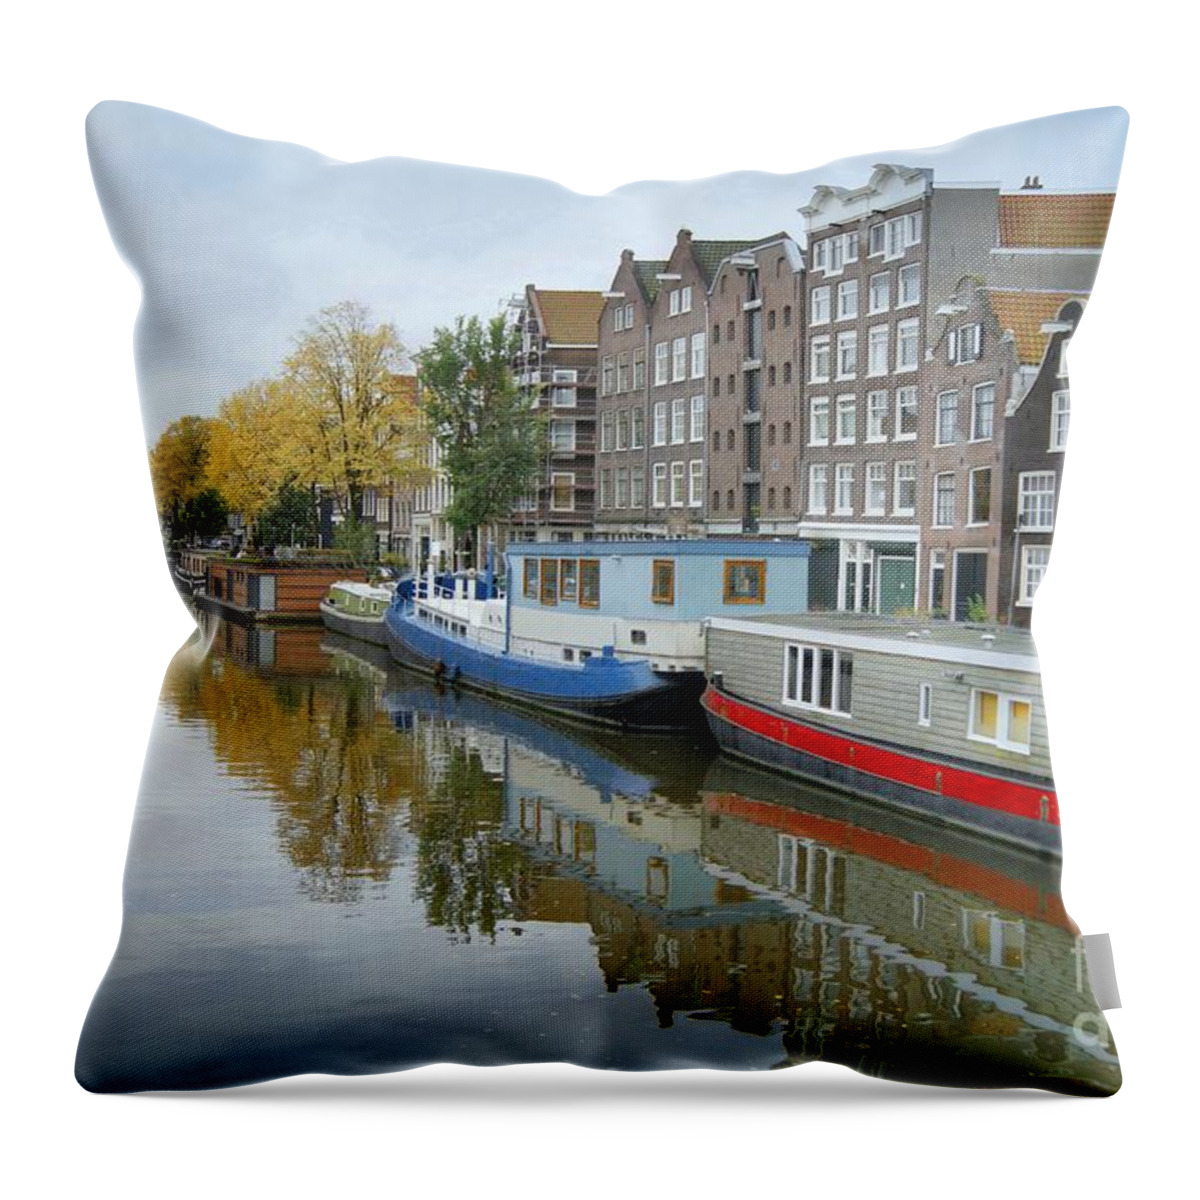 Amsterdam Throw Pillow featuring the photograph Reflections Of Amsterdam by David Birchall